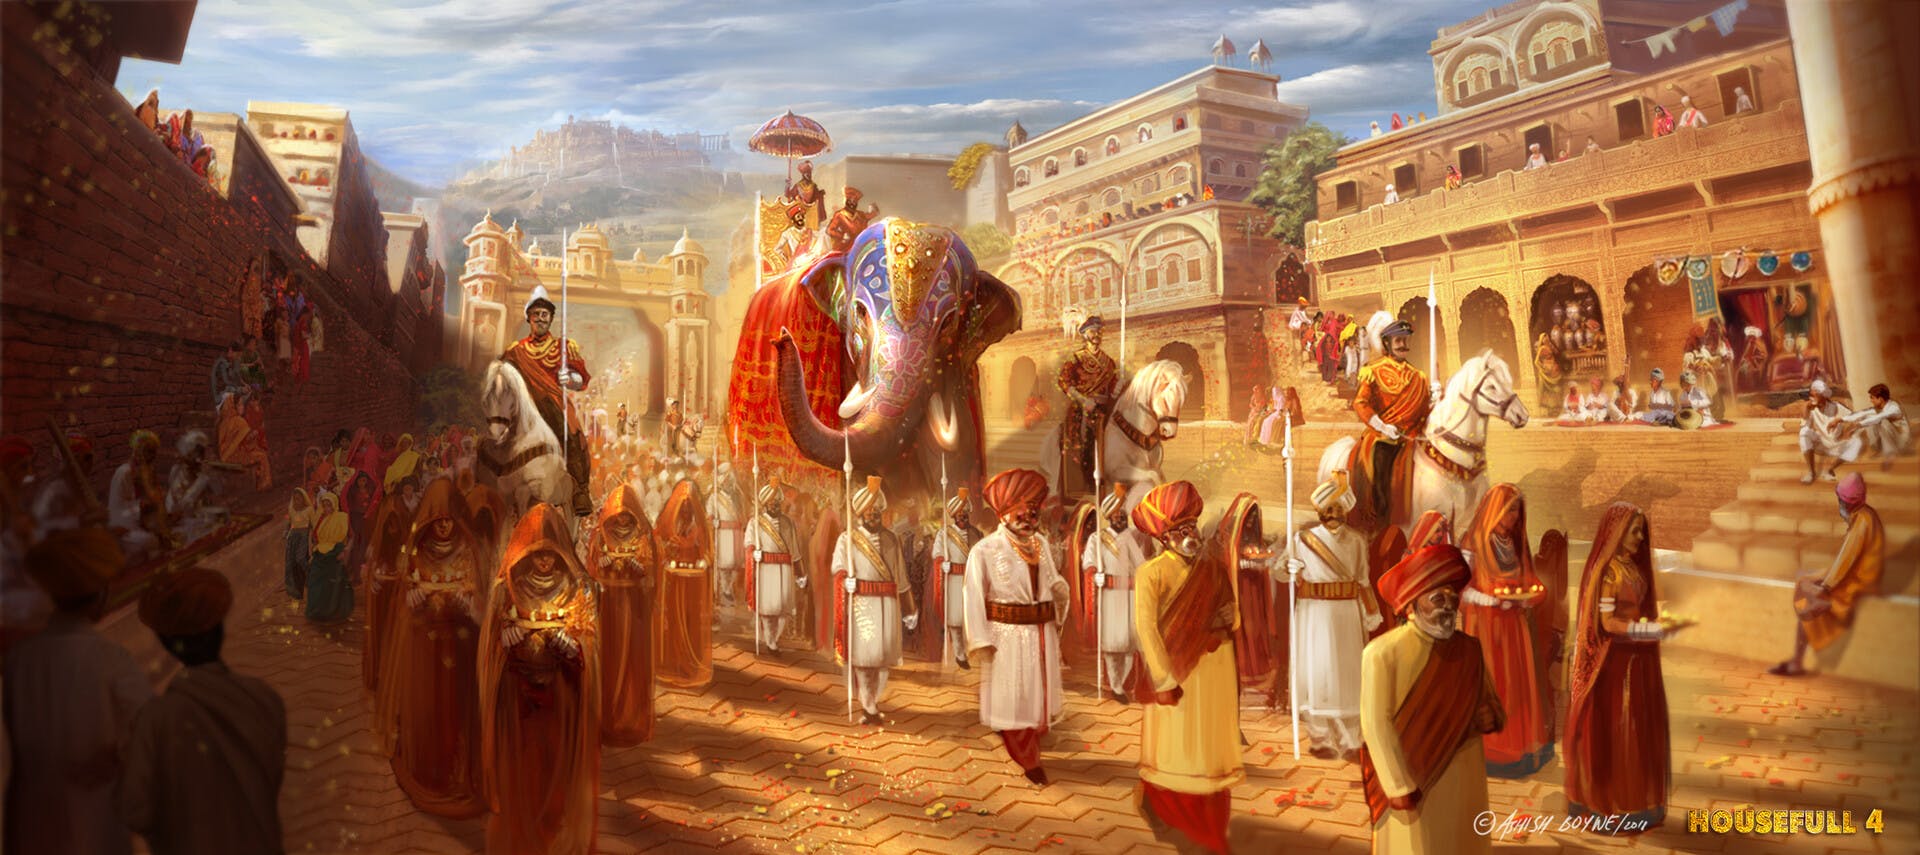 A parade with an elephant in old India